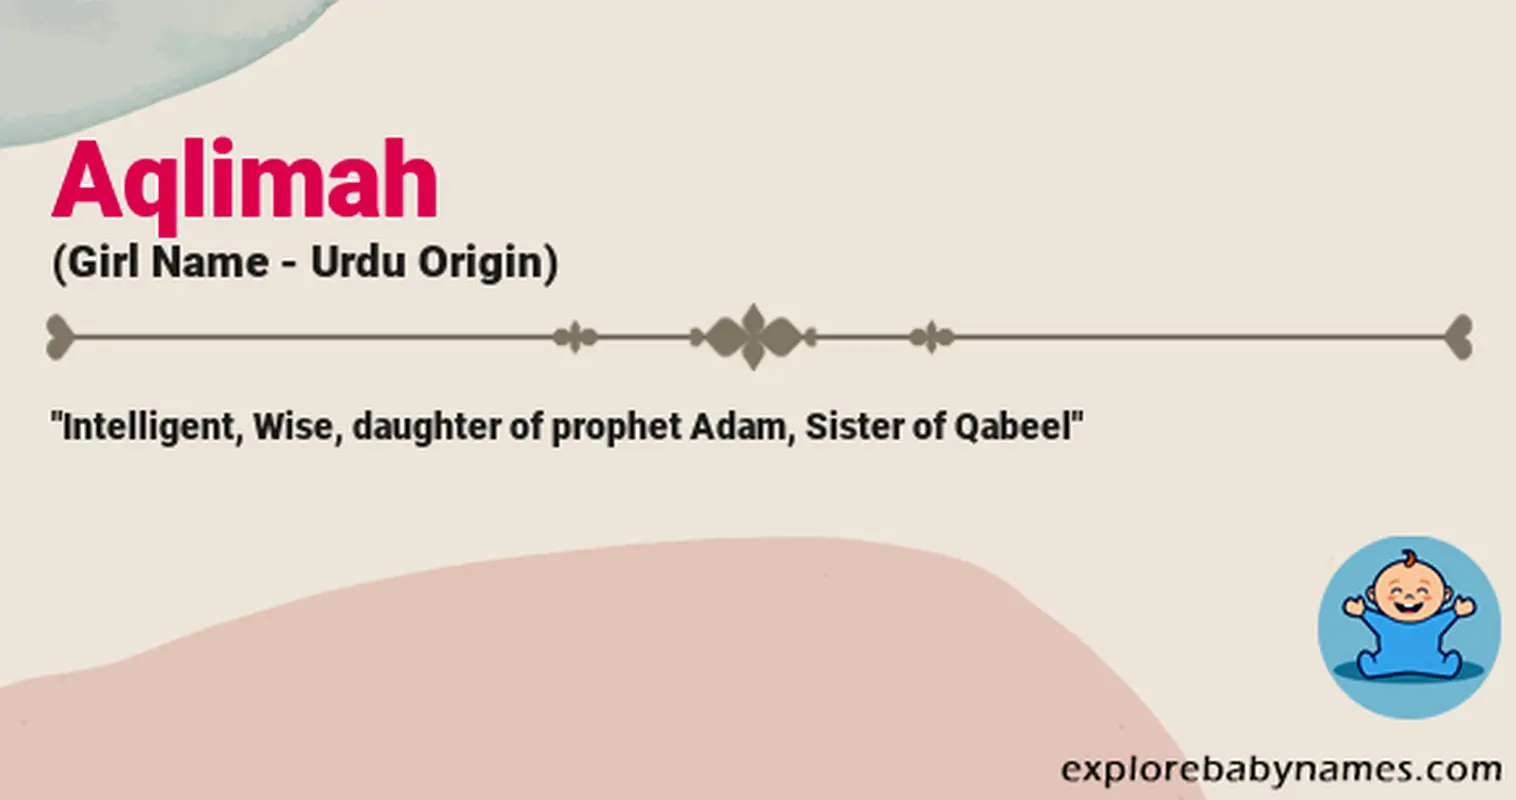 Meaning of Aqlimah